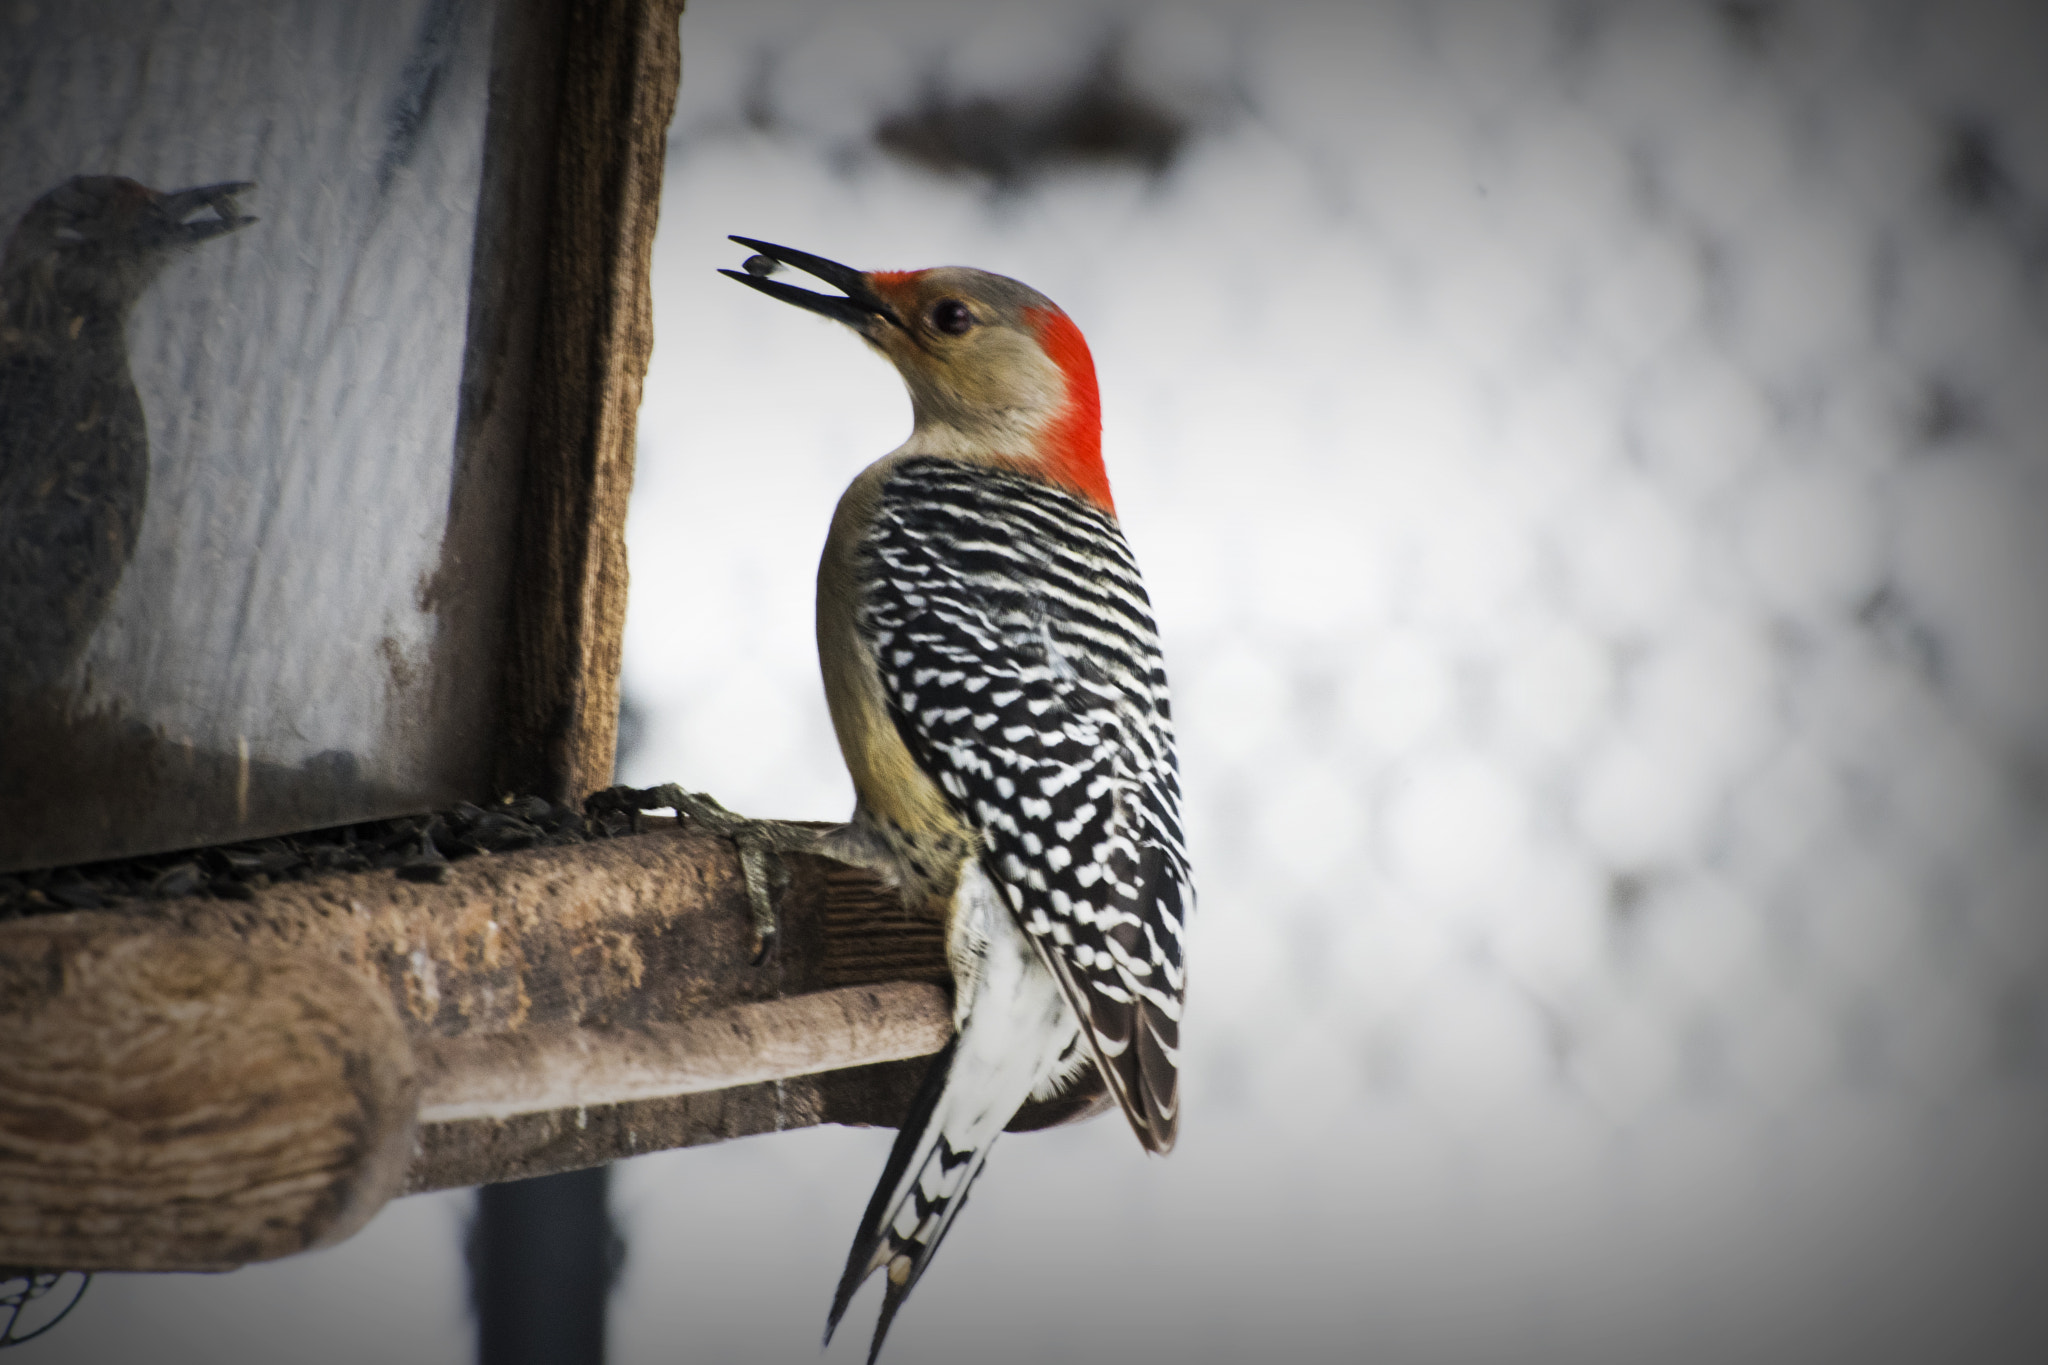 Nikon D500 sample photo. Red-bellied woodpecker at feeder. windsor, on. photography